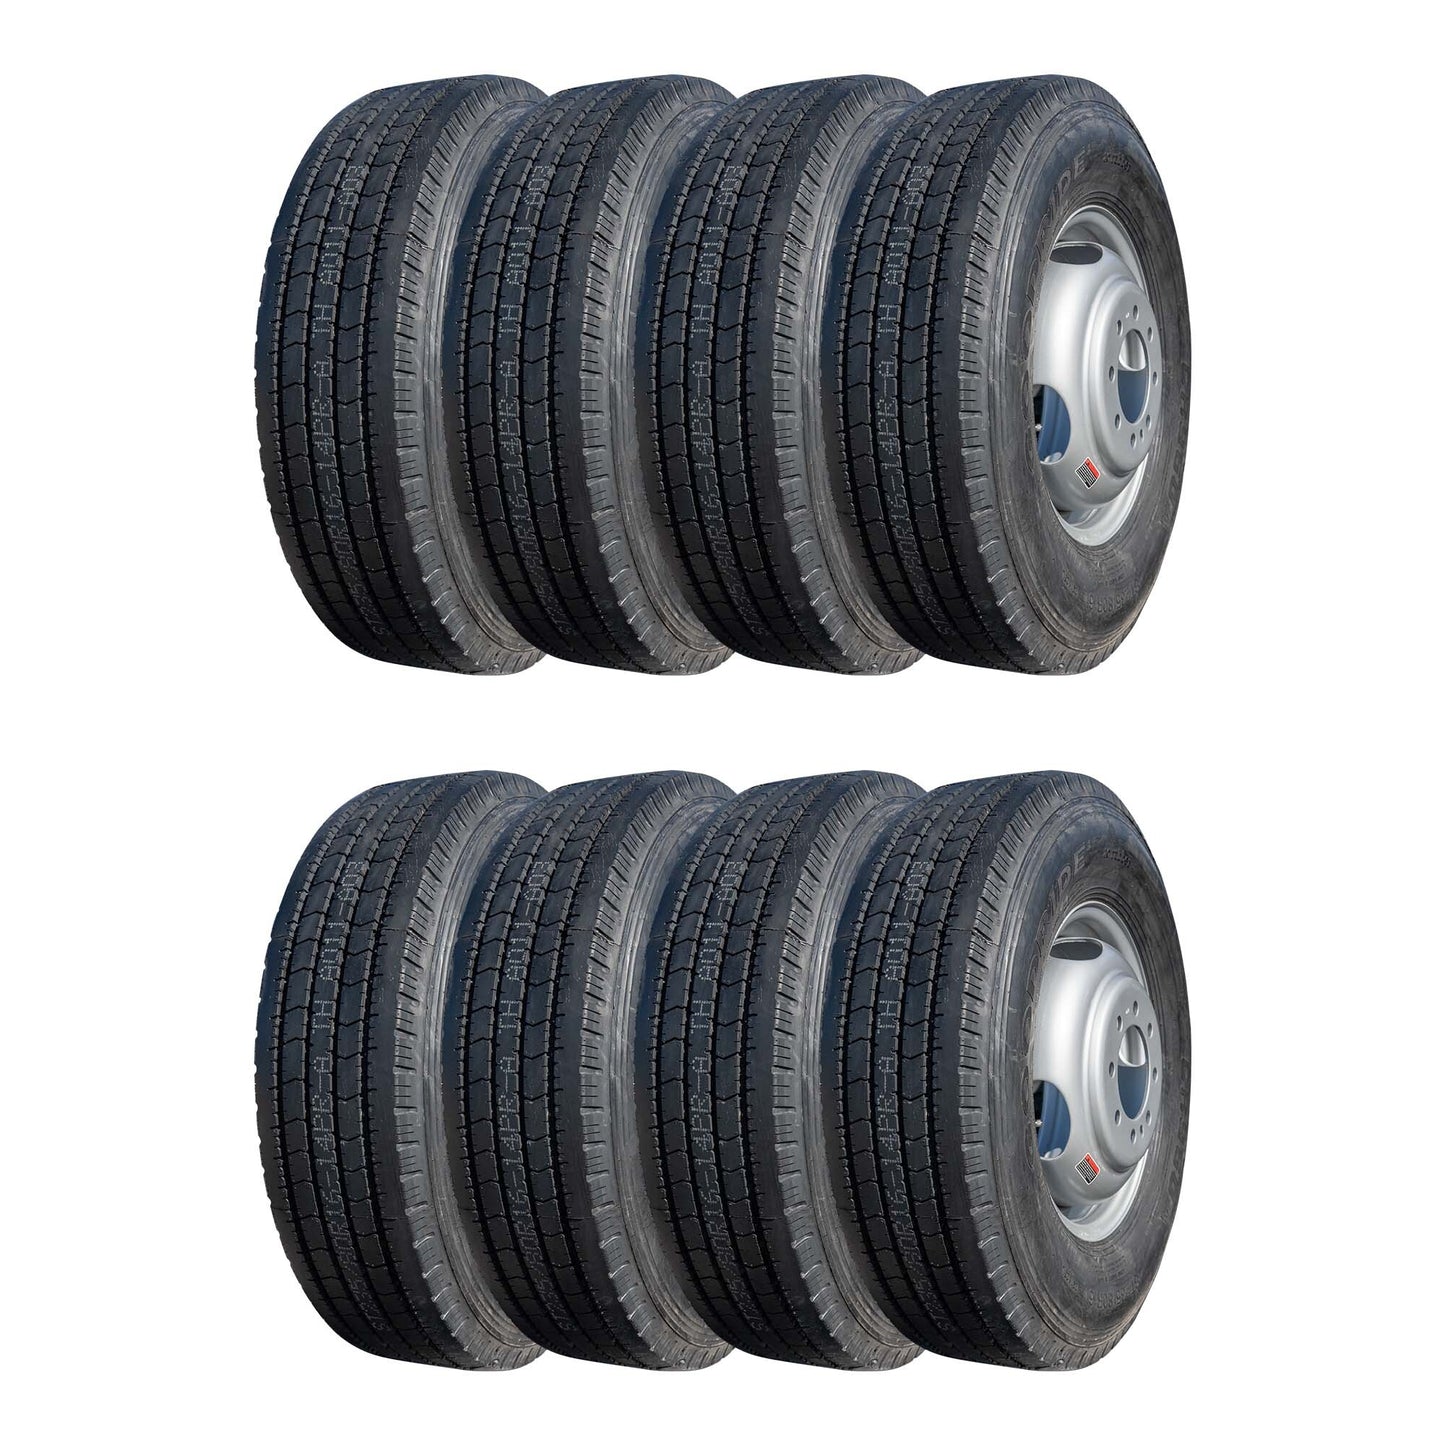 Goodride 16" 14 ply Radial Trailer Tire & Wheel - ST 235/80 R16 8 lug Dual - The Trailer Parts Outlet